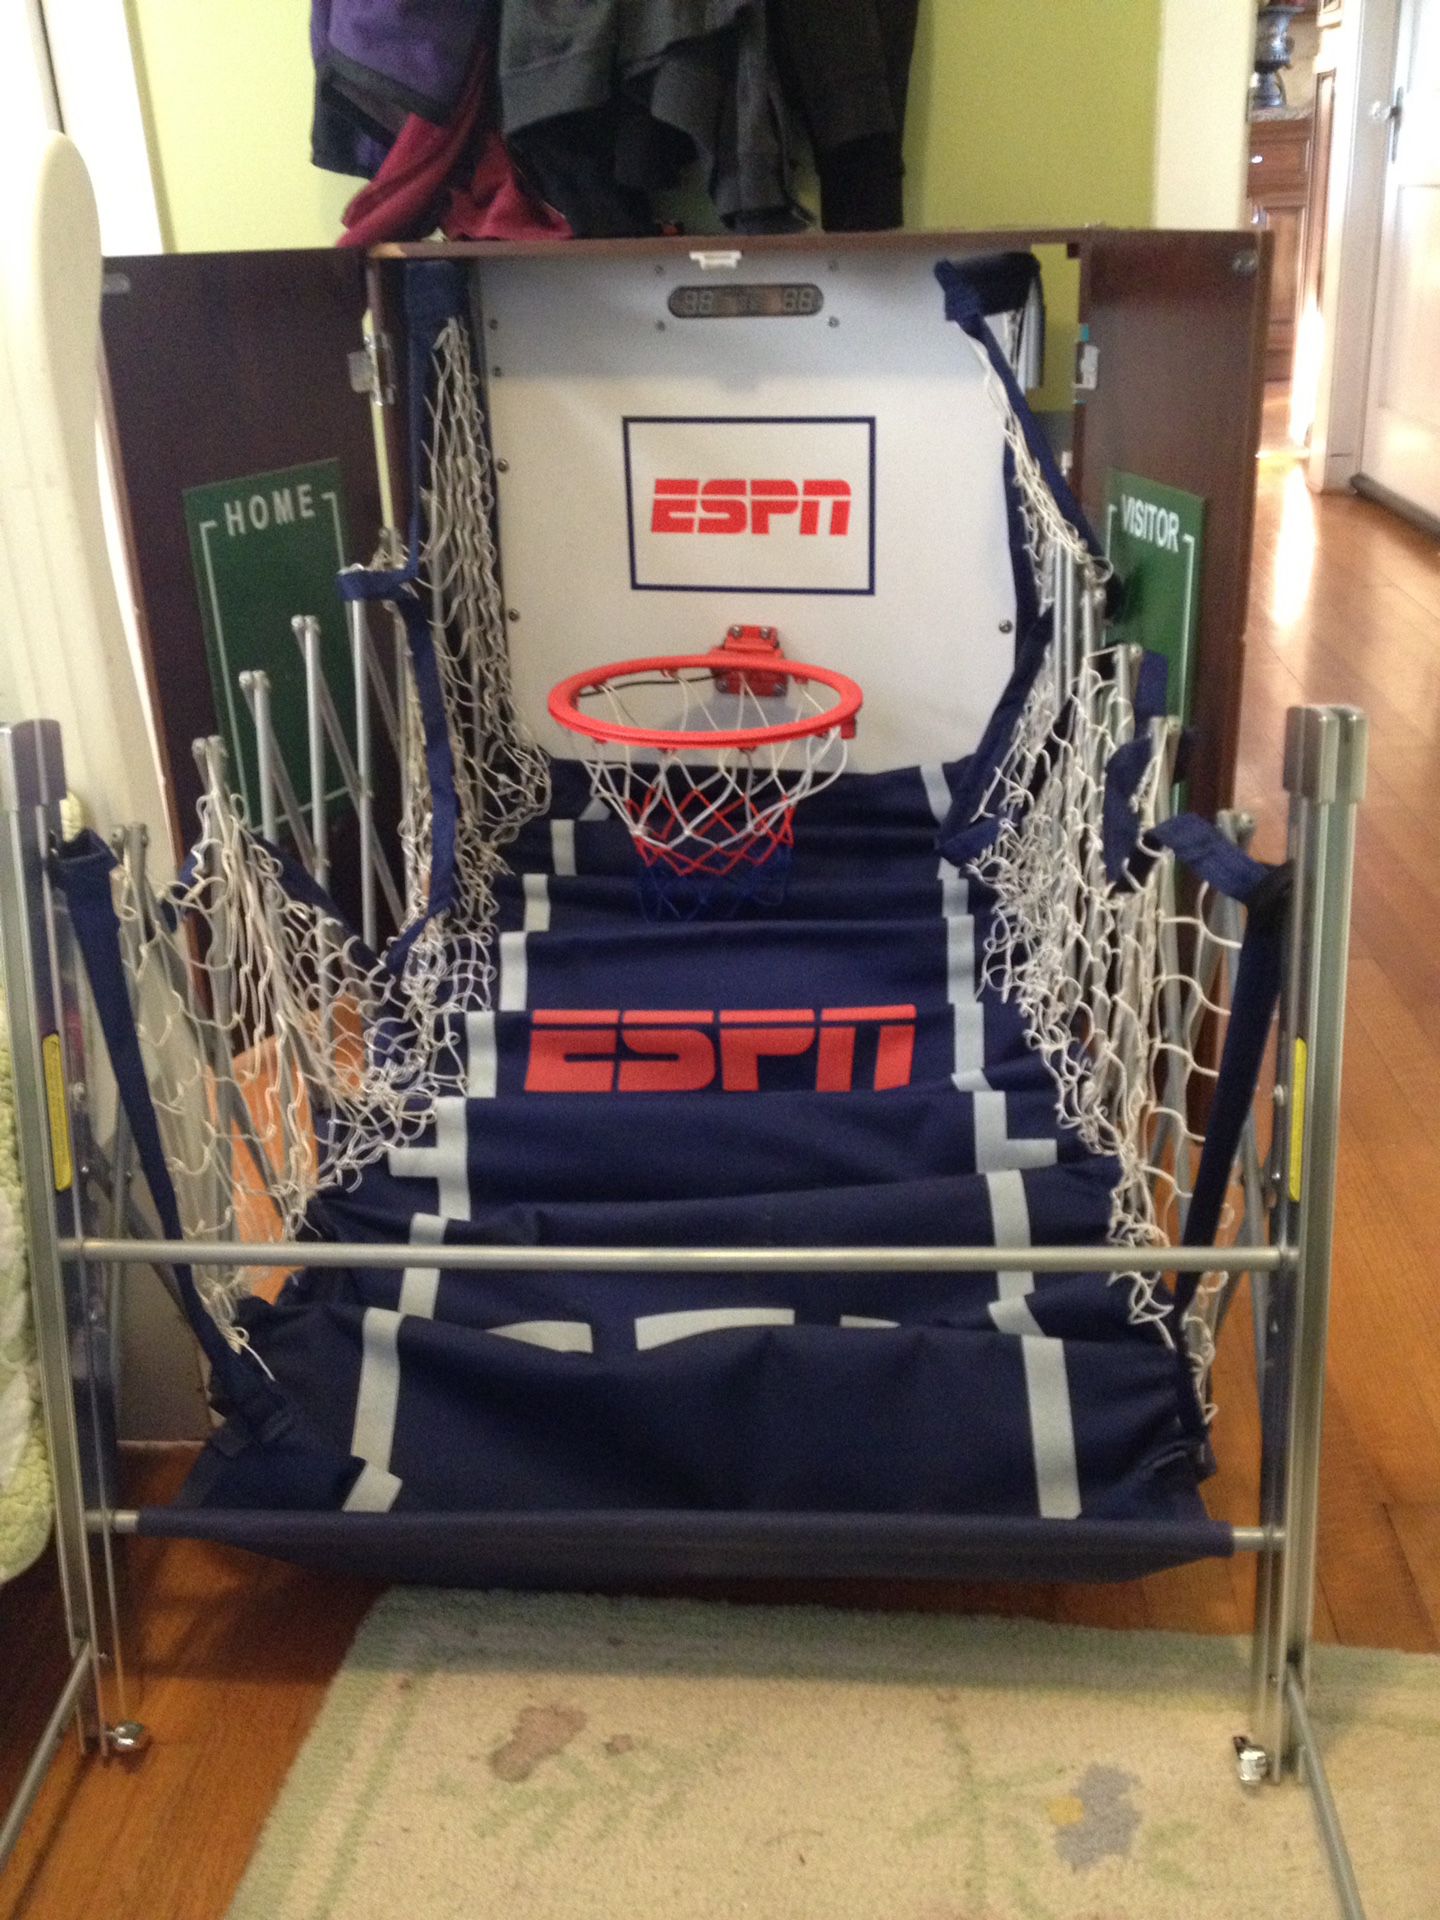 ESPN foldable basketball Hoop, Good Condition, Use A Few Times.